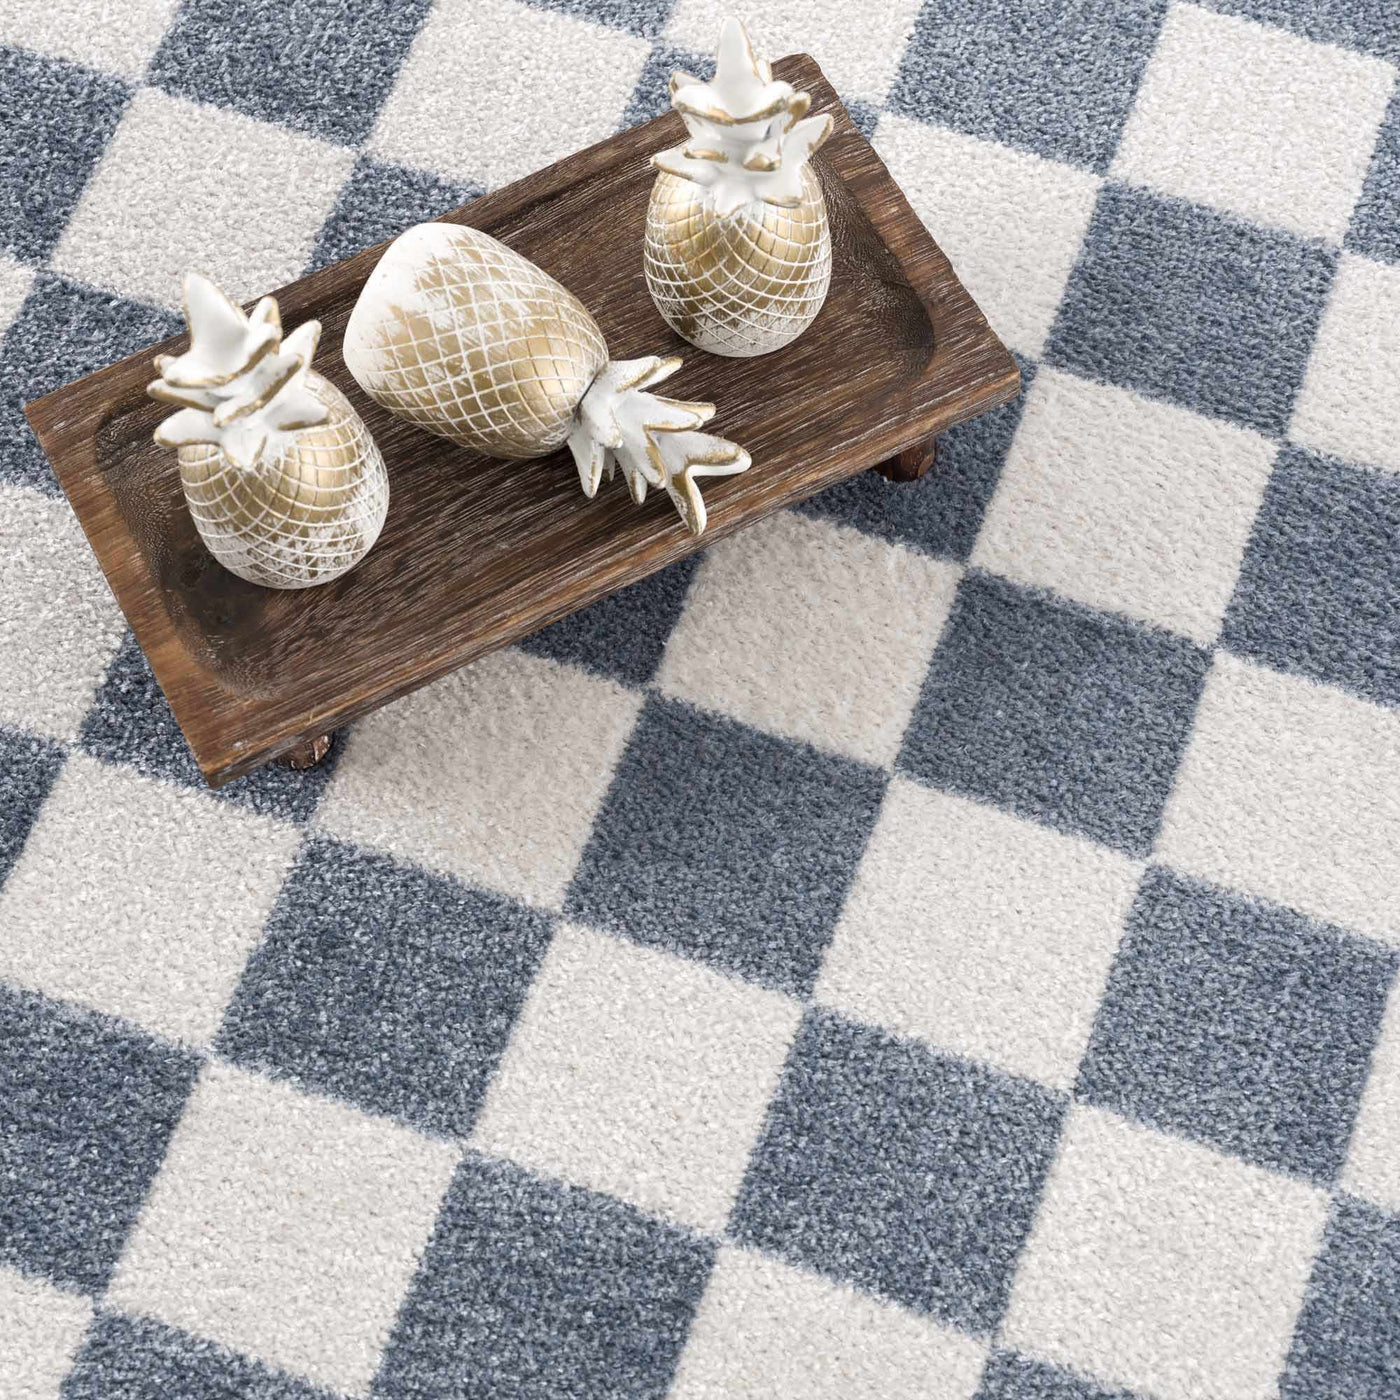 Brone Checkered Washable Area Rug - Sweet Water Decor - Rugs